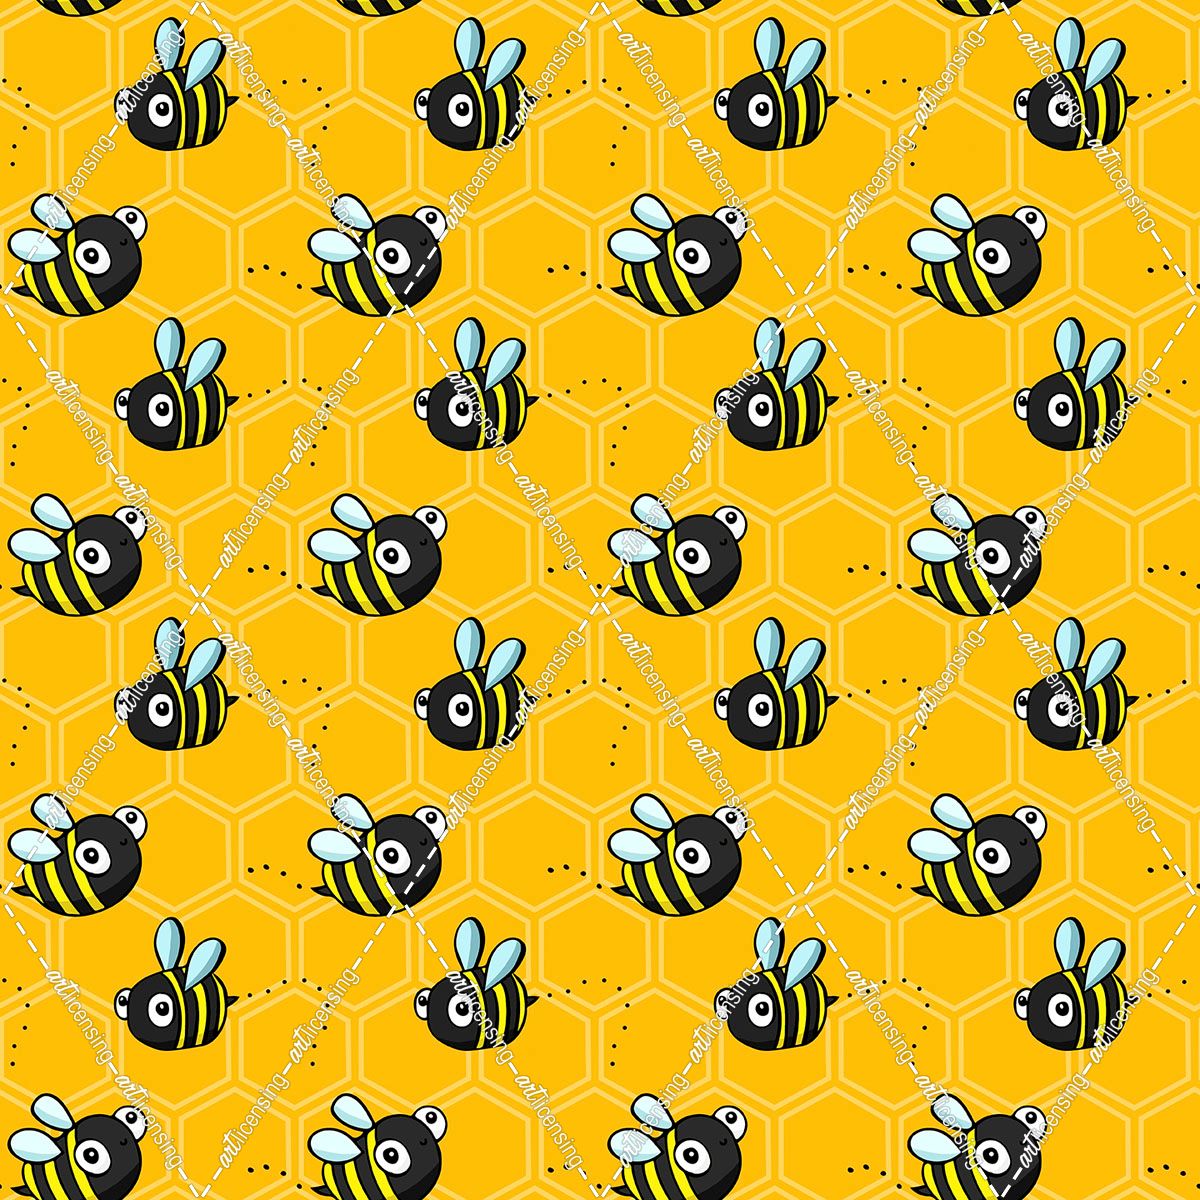 Bumble Bee Honeycomb Pattern